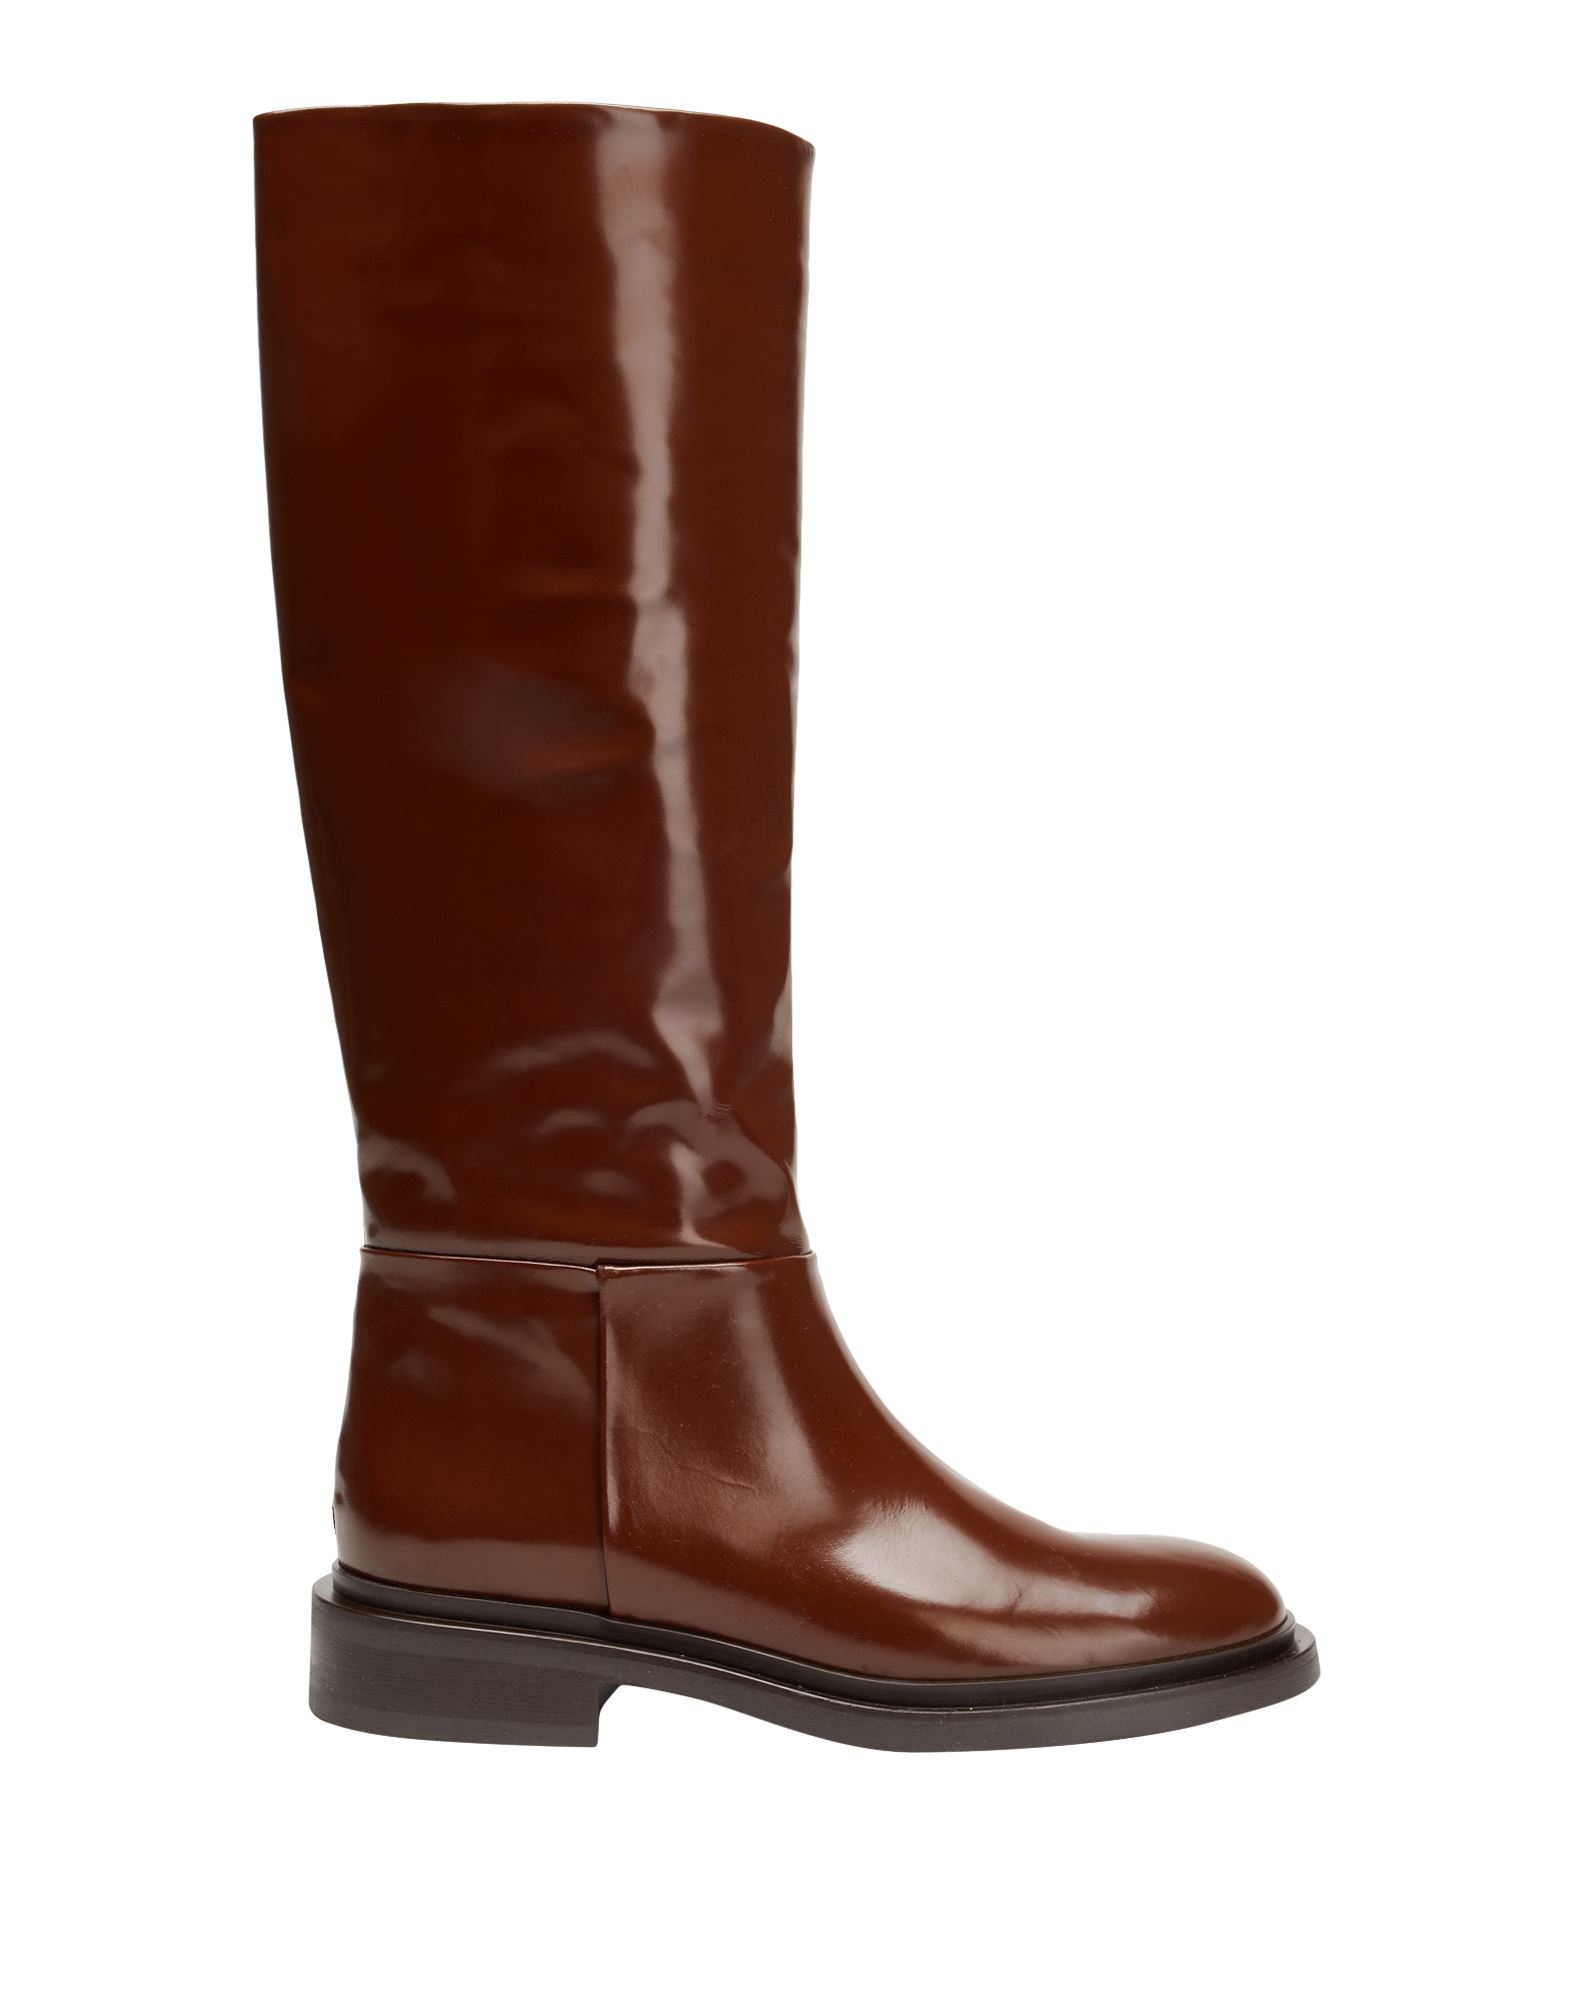 8 By Yoox Leather Round-toe High Boot Woman Knee Boots Brown Size 11 Calfskin